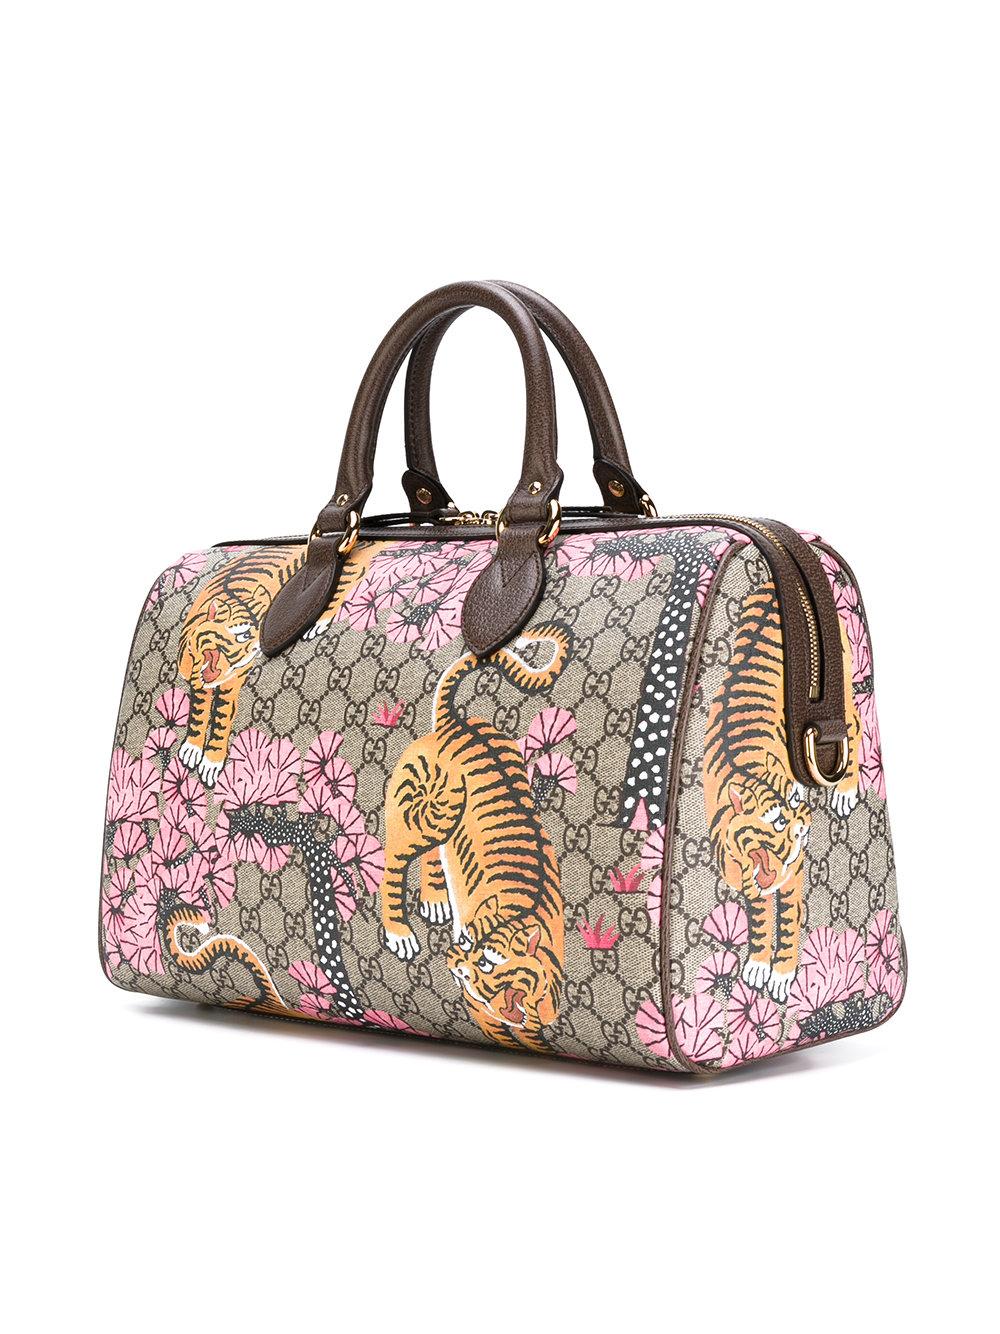 Lyst - Gucci - Gg Supreme Bengal Tiger Shoulder Bag - Women - Leather - One Size